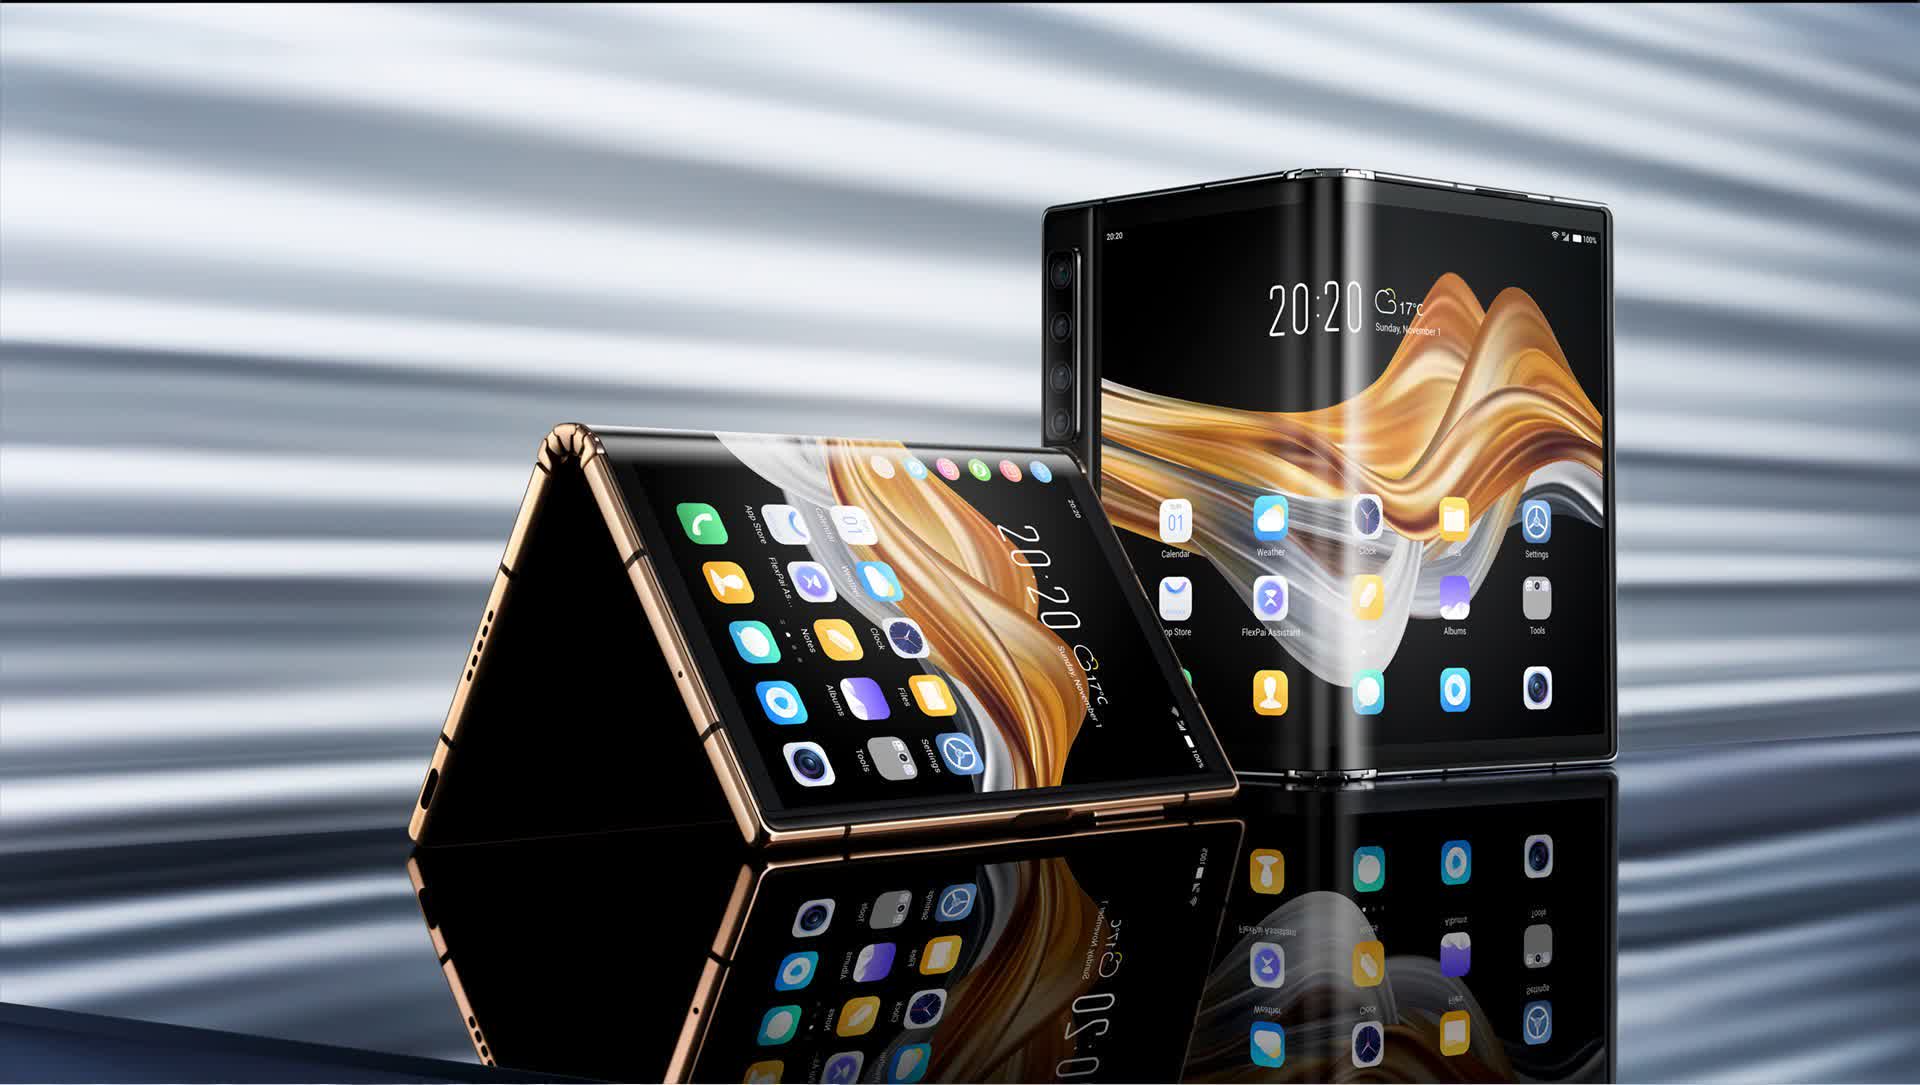 Royole, maker of the first foldable phone, releases successor